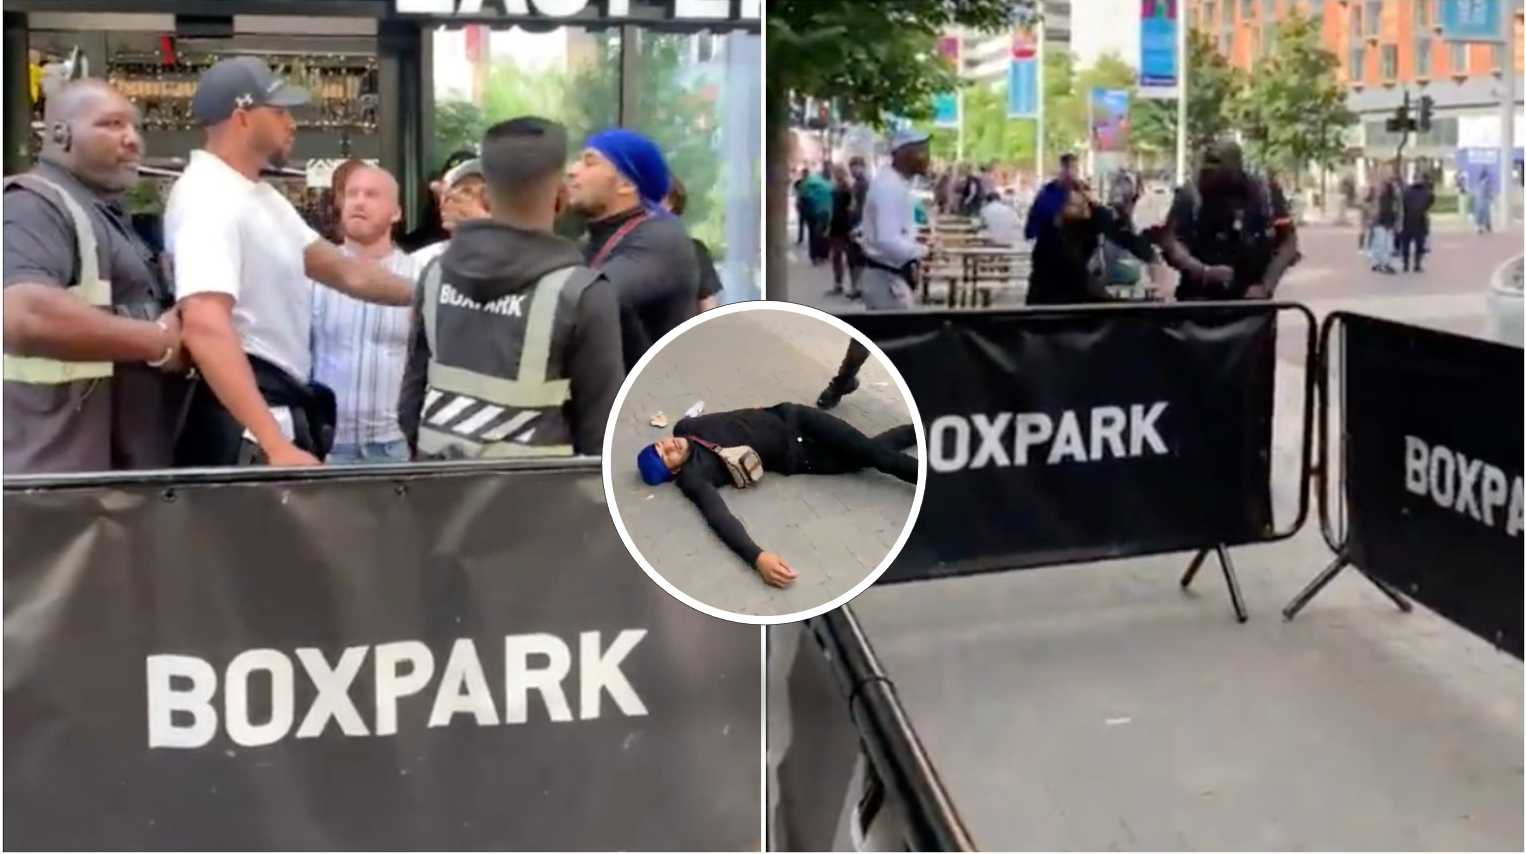 Boxpark founder responds to Julius Francis knockout punch video